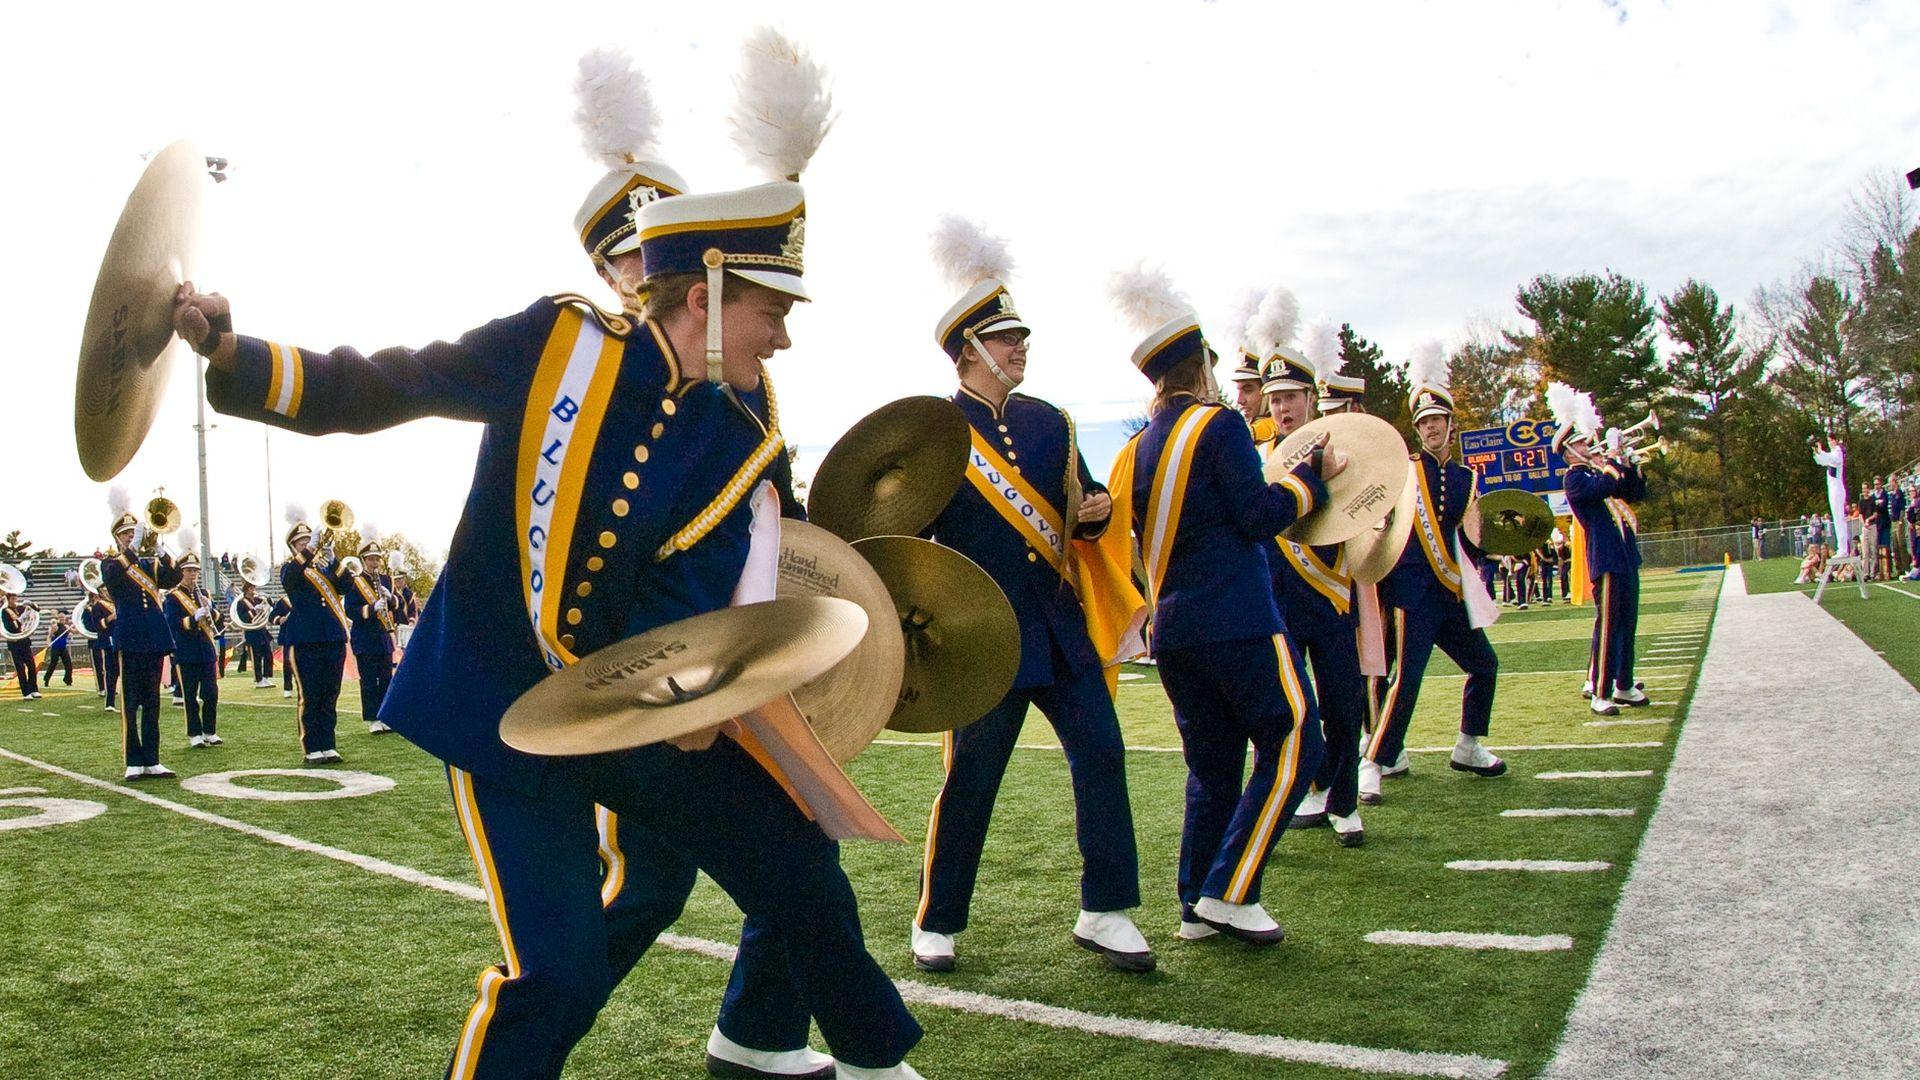 Cymbals of pride in the Blugold Marching Band